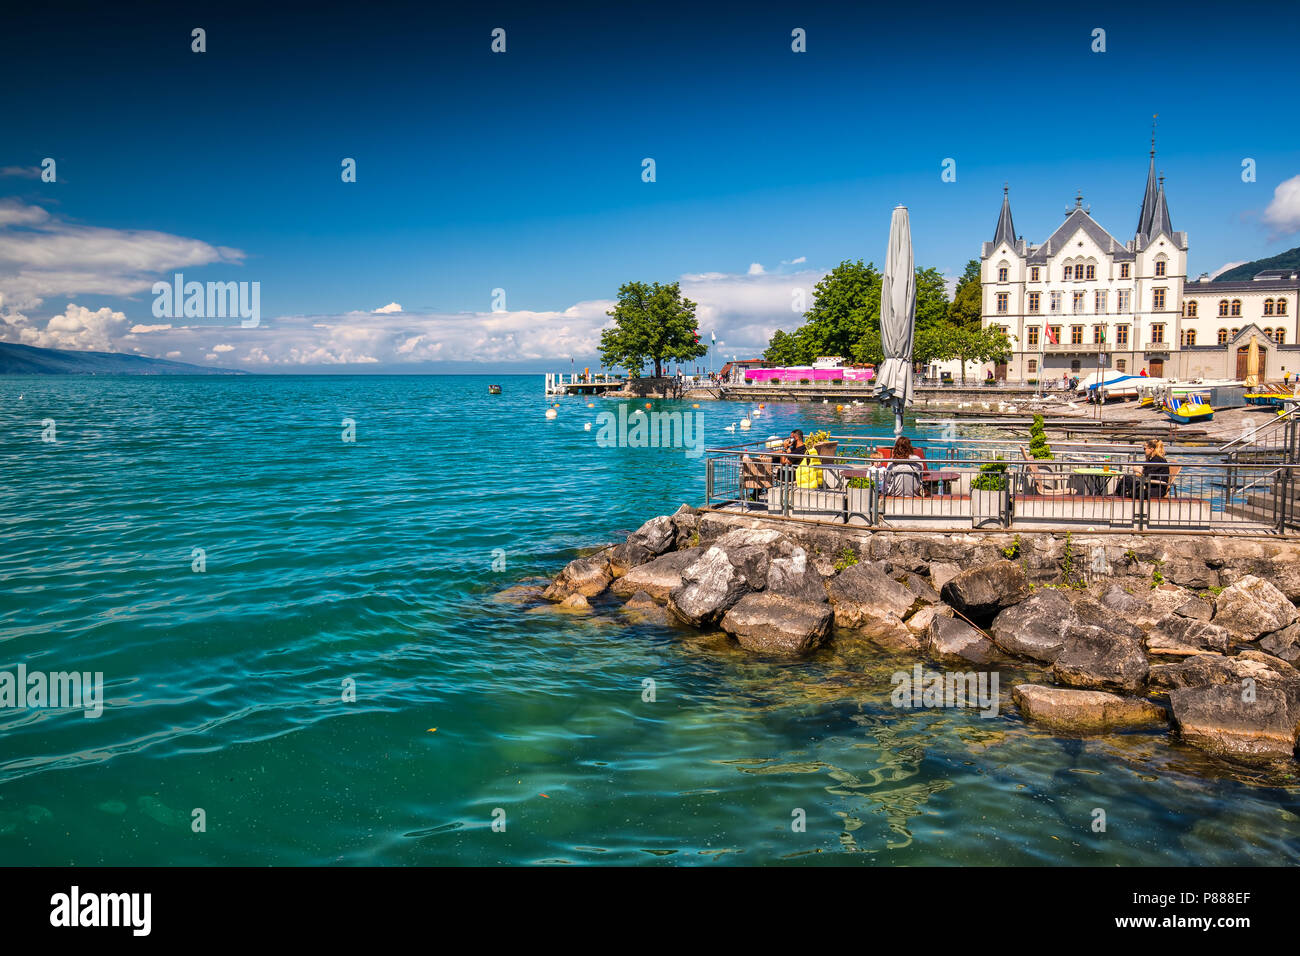 VEVEY, SWITZERLAND - May 31, 2018 - Park in Vevey town near Montreux with Swiss Alps in background, Switzerland, Europe. Stock Photo